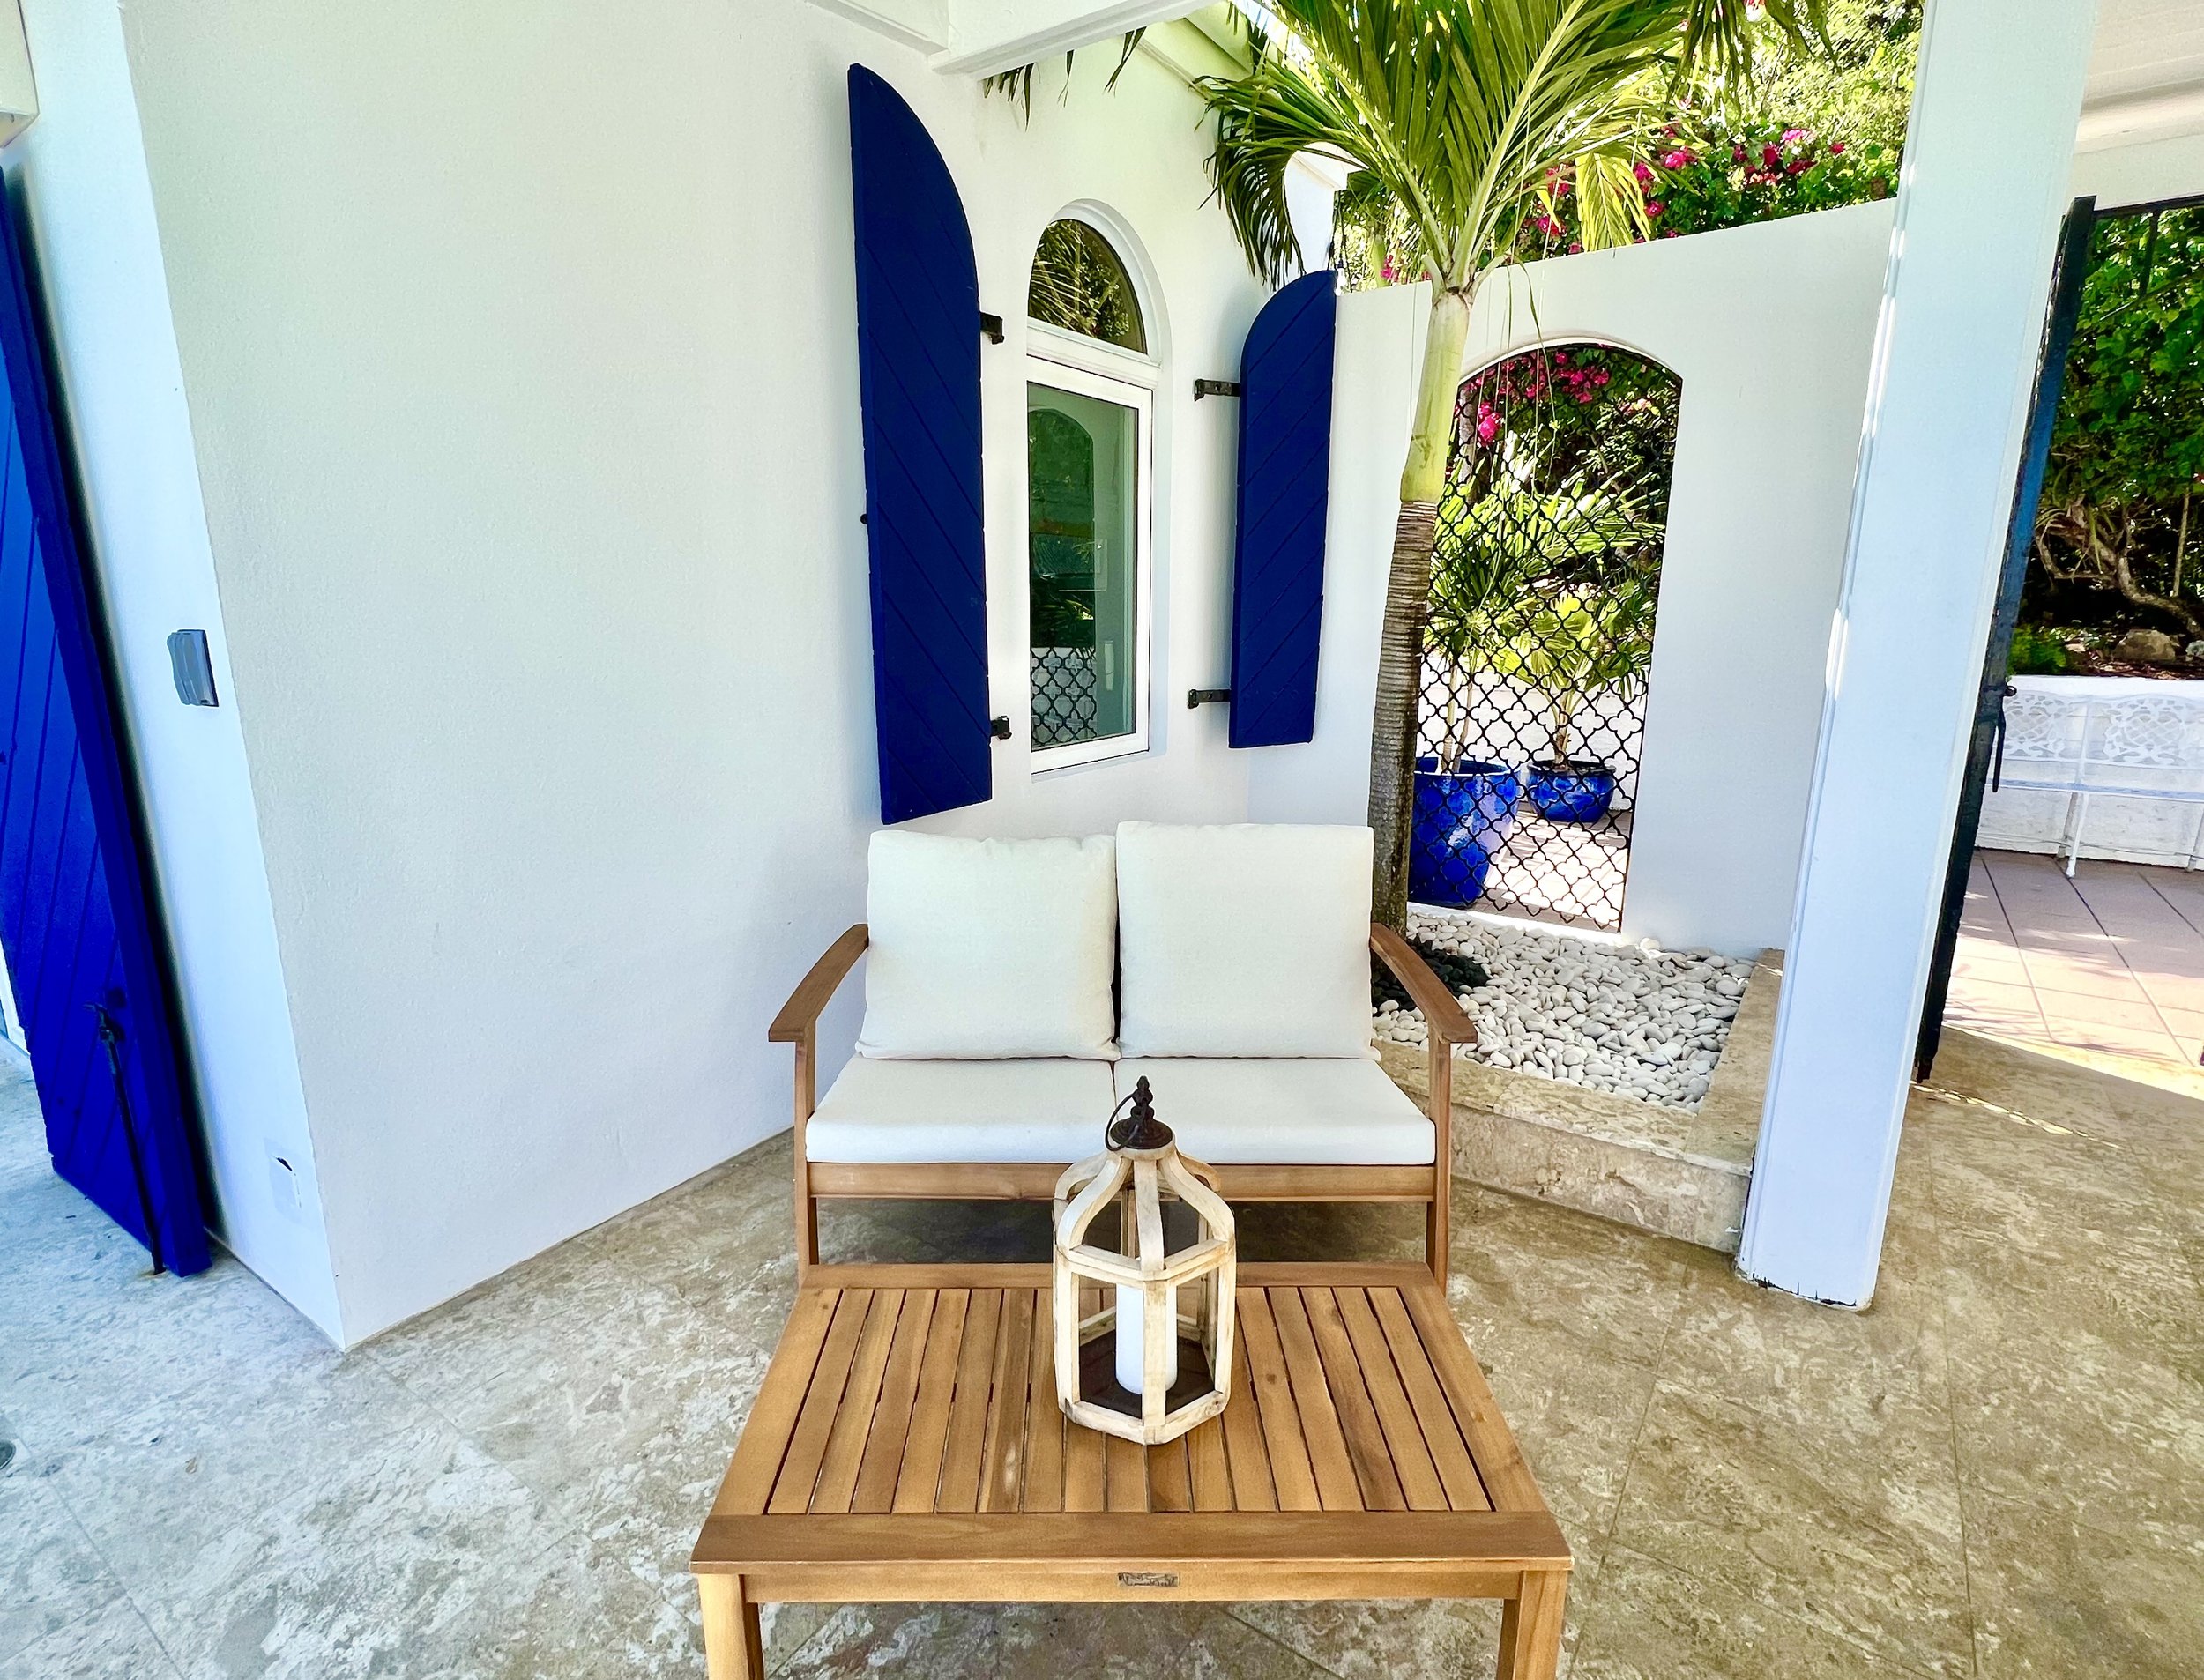 patio furniture by entry.jpg